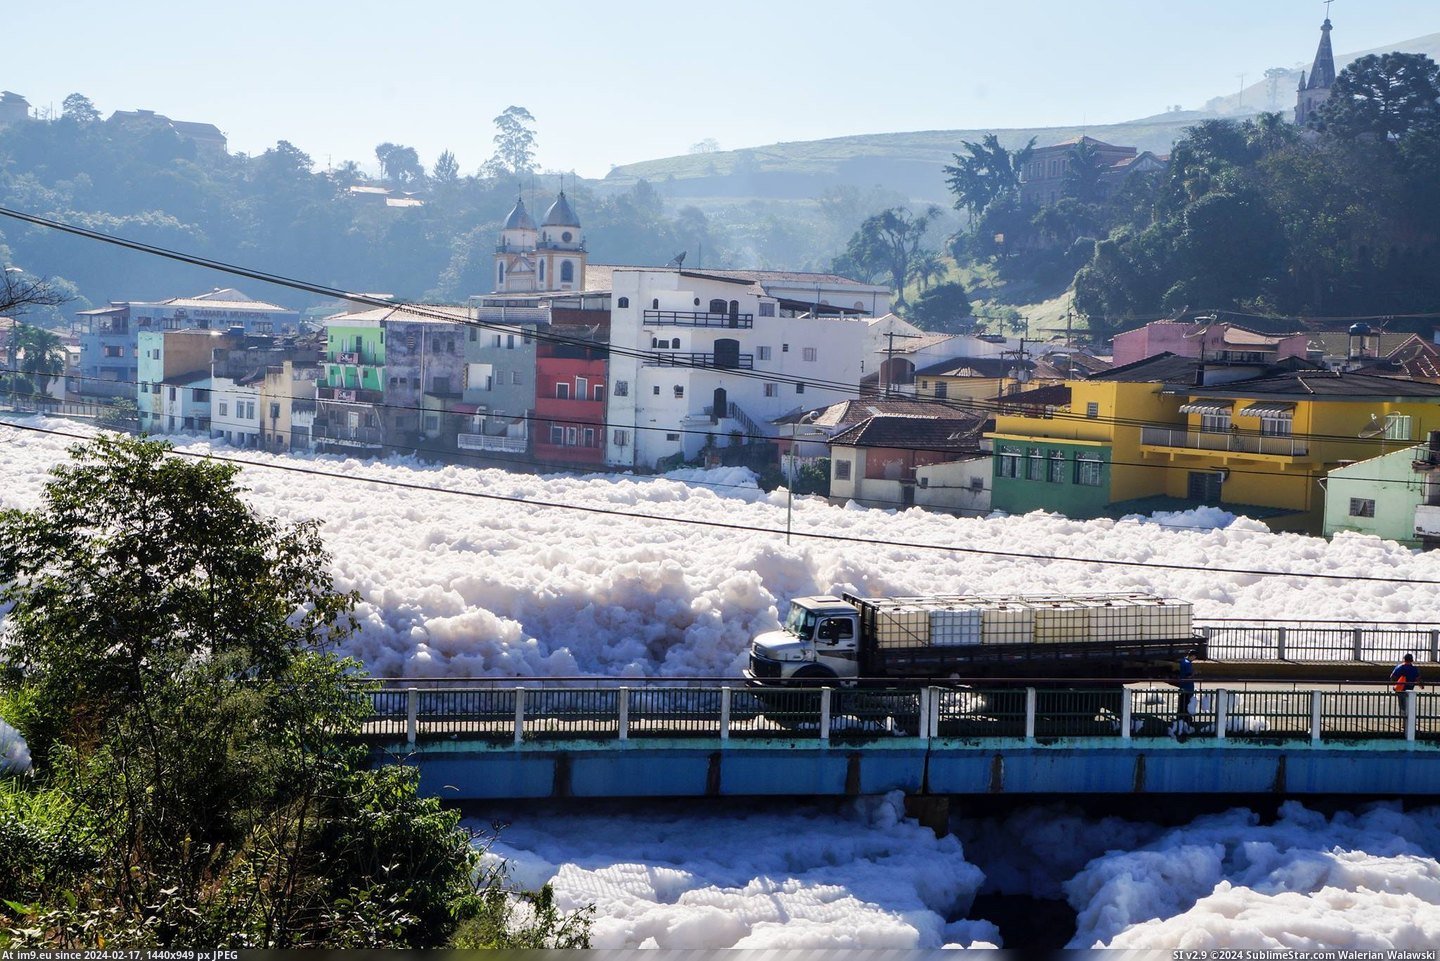 #Wtf #River #Foam #Pollution #Paulo #Covered #Brazil #Caused [Wtf] River in São Paulo, Brazil is covered in foam caused by pollution Pic. (Изображение из альбом My r/WTF favs))